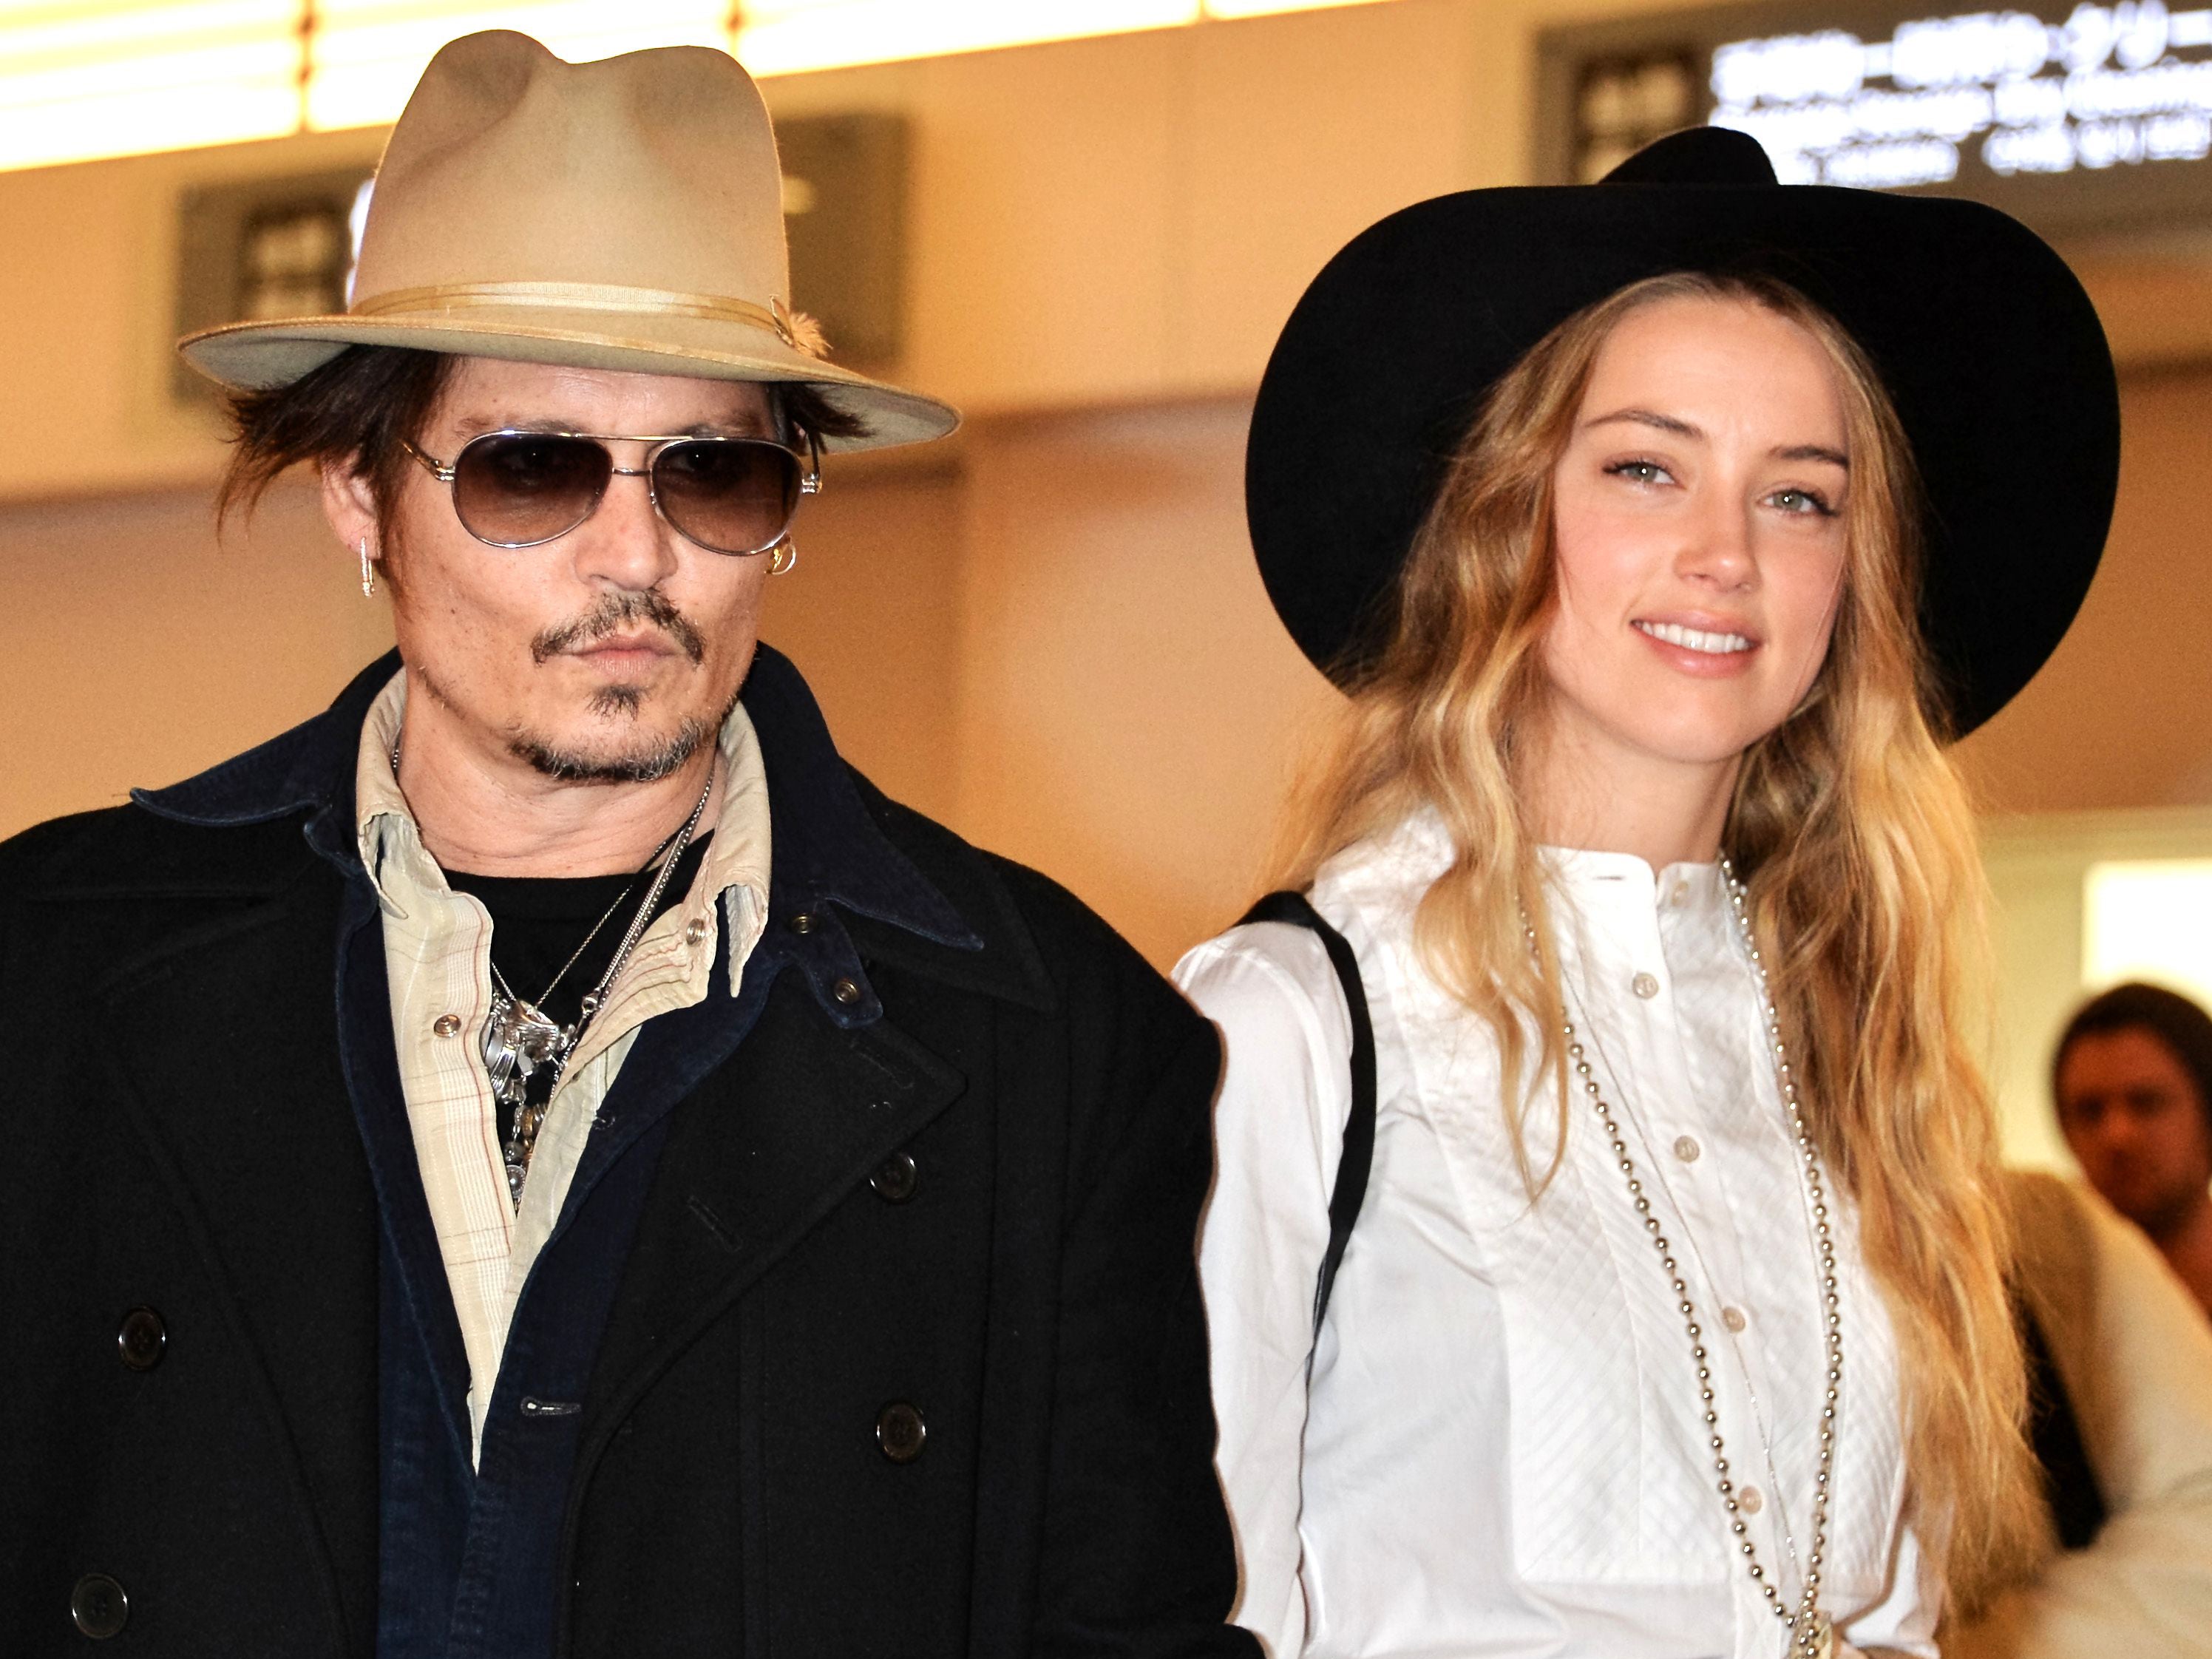 Johnny Depp and Amber Heard have been engaged since early 2014